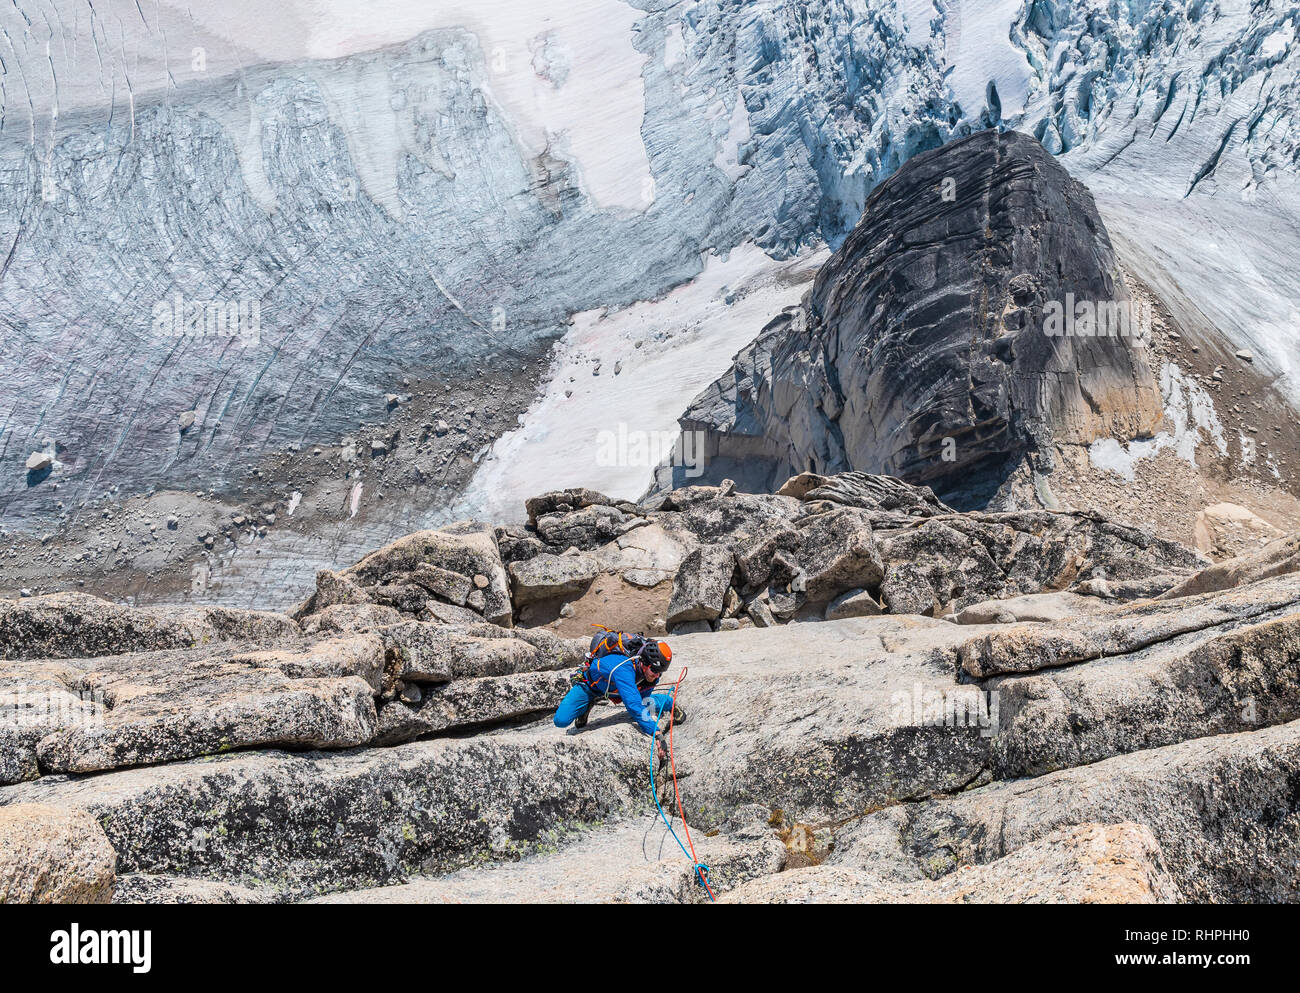 Brandon Prince and Nic Houser on a route called Surfs Up rated 5.9 on Snowpatch Spire in the Bugaboos Stock Photo